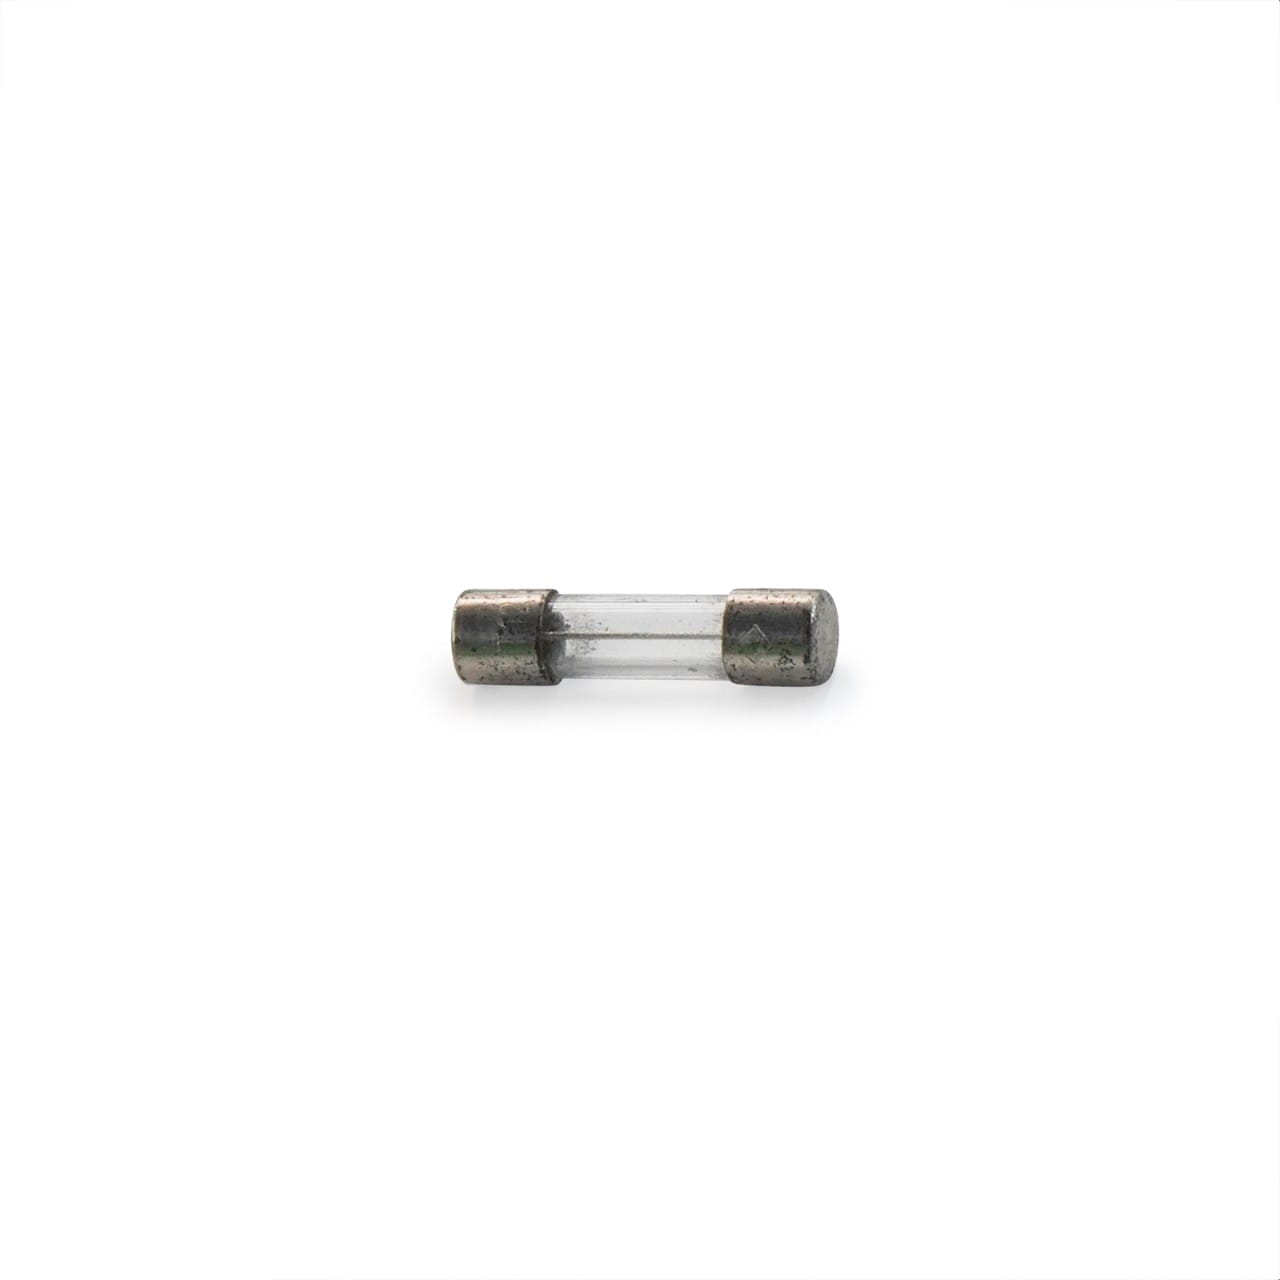 Graco Replacement Fuse 6.3A Slow Blow, 230V